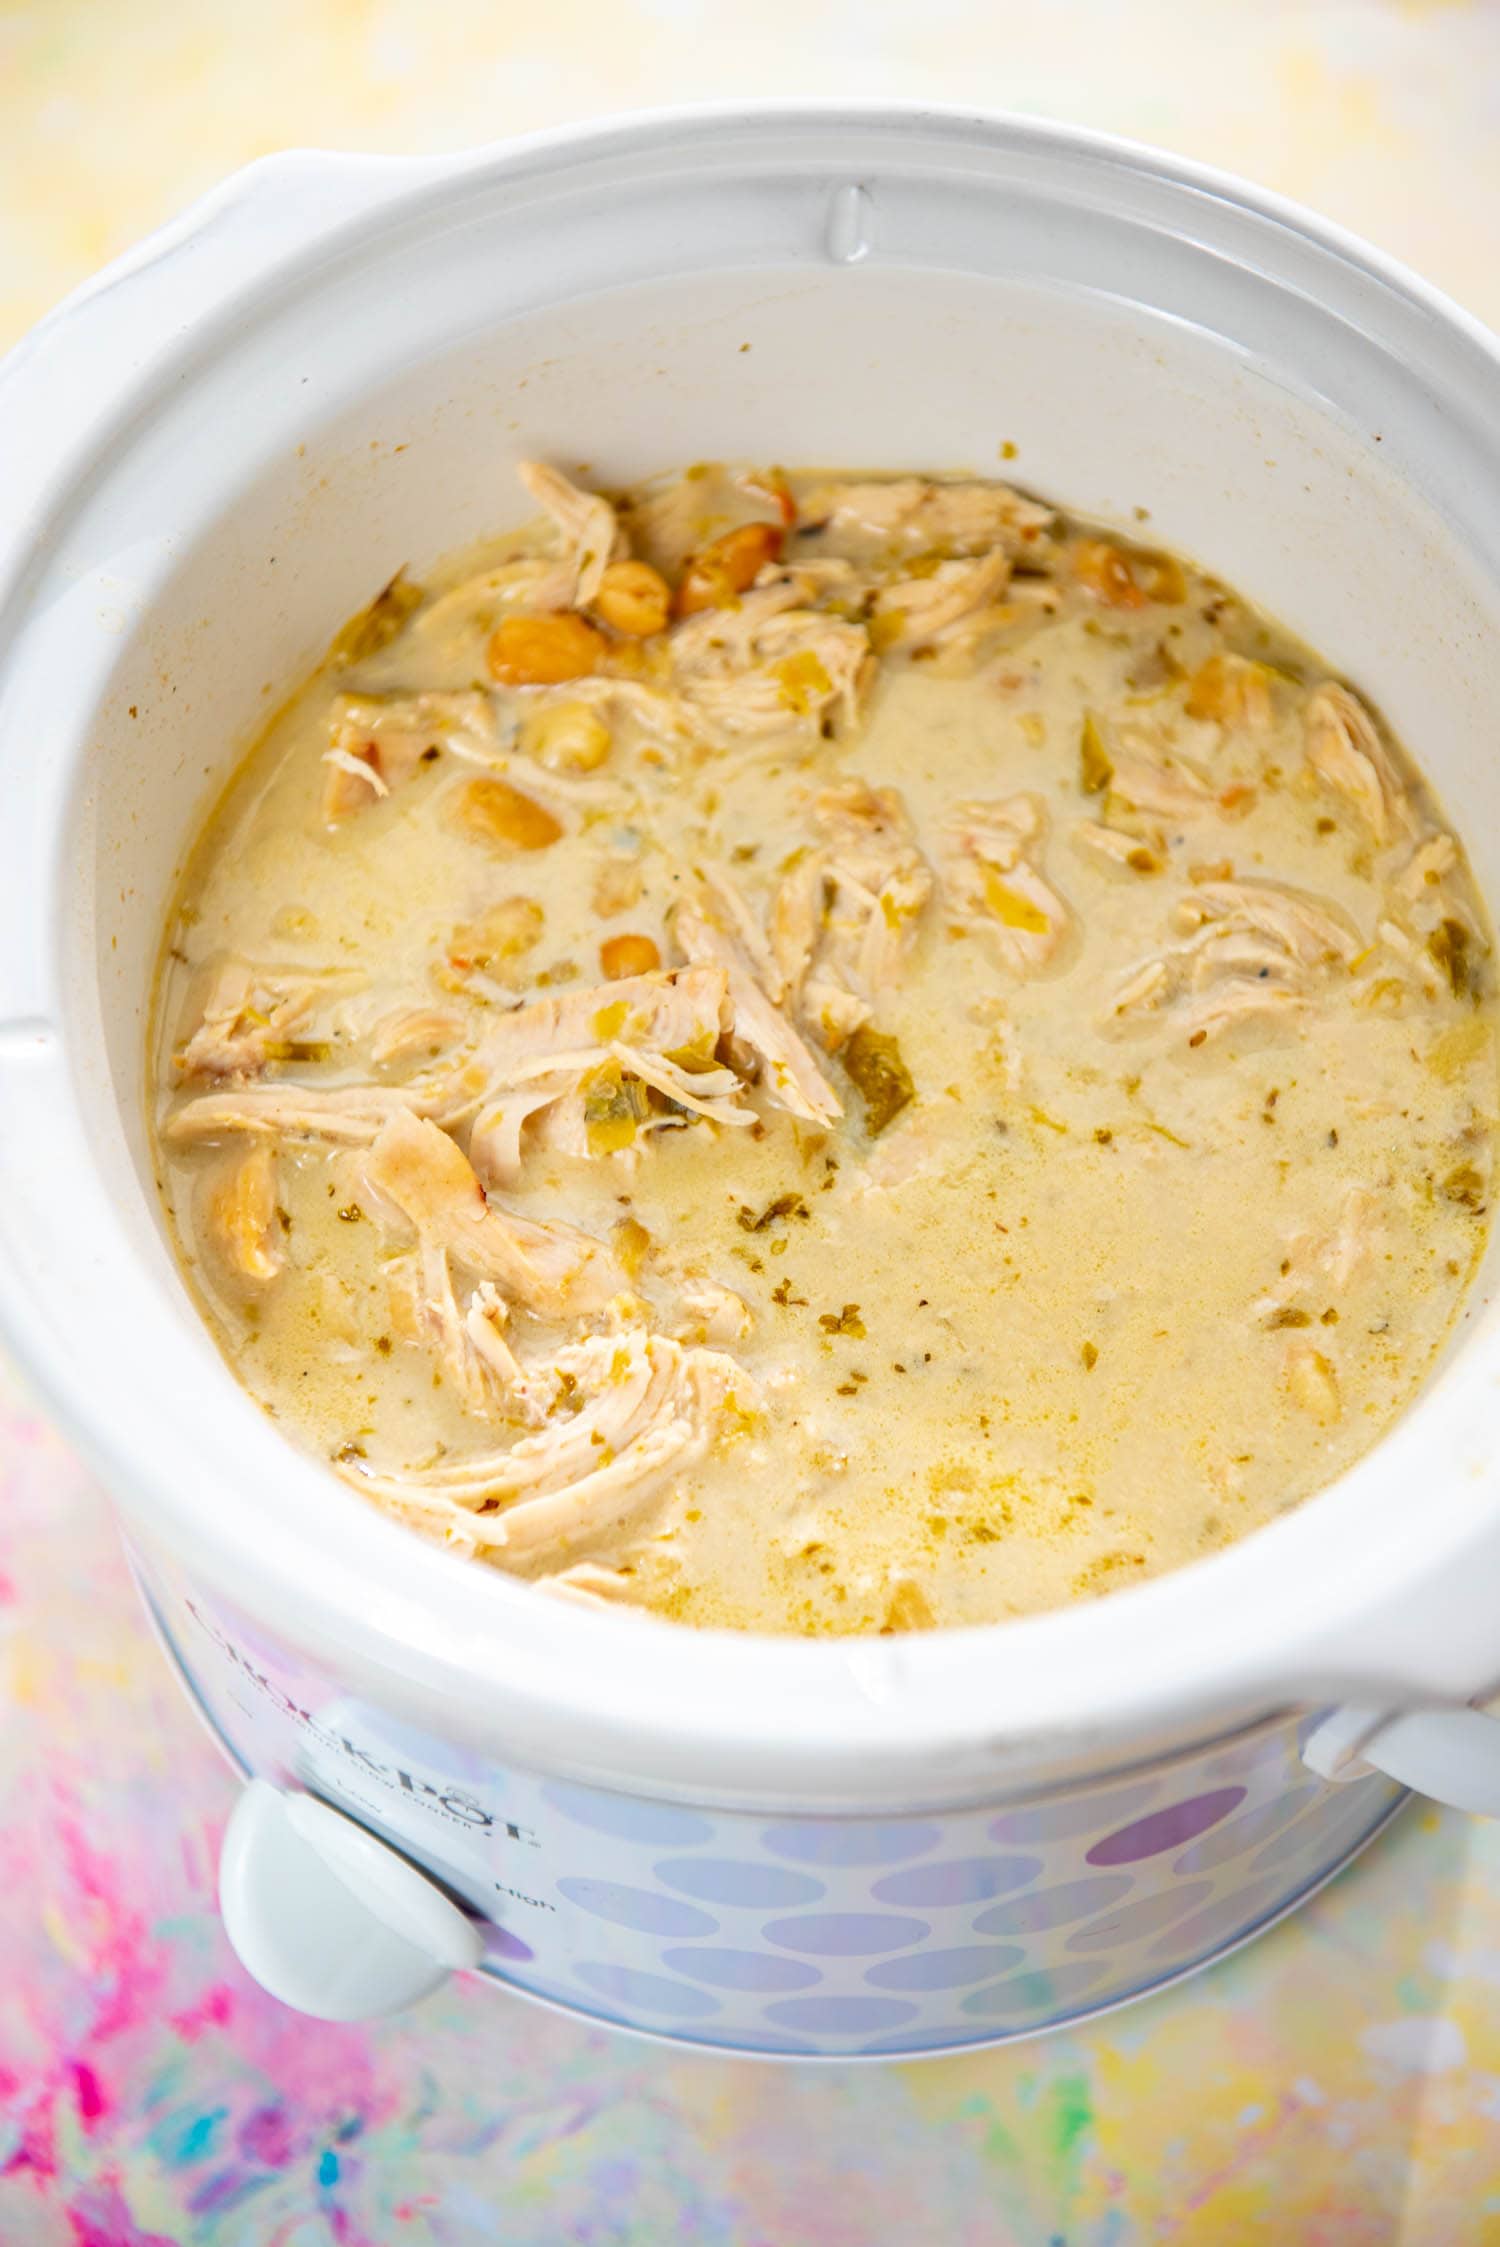 purple polk-a-dot slow cooker filled with white chicken chili